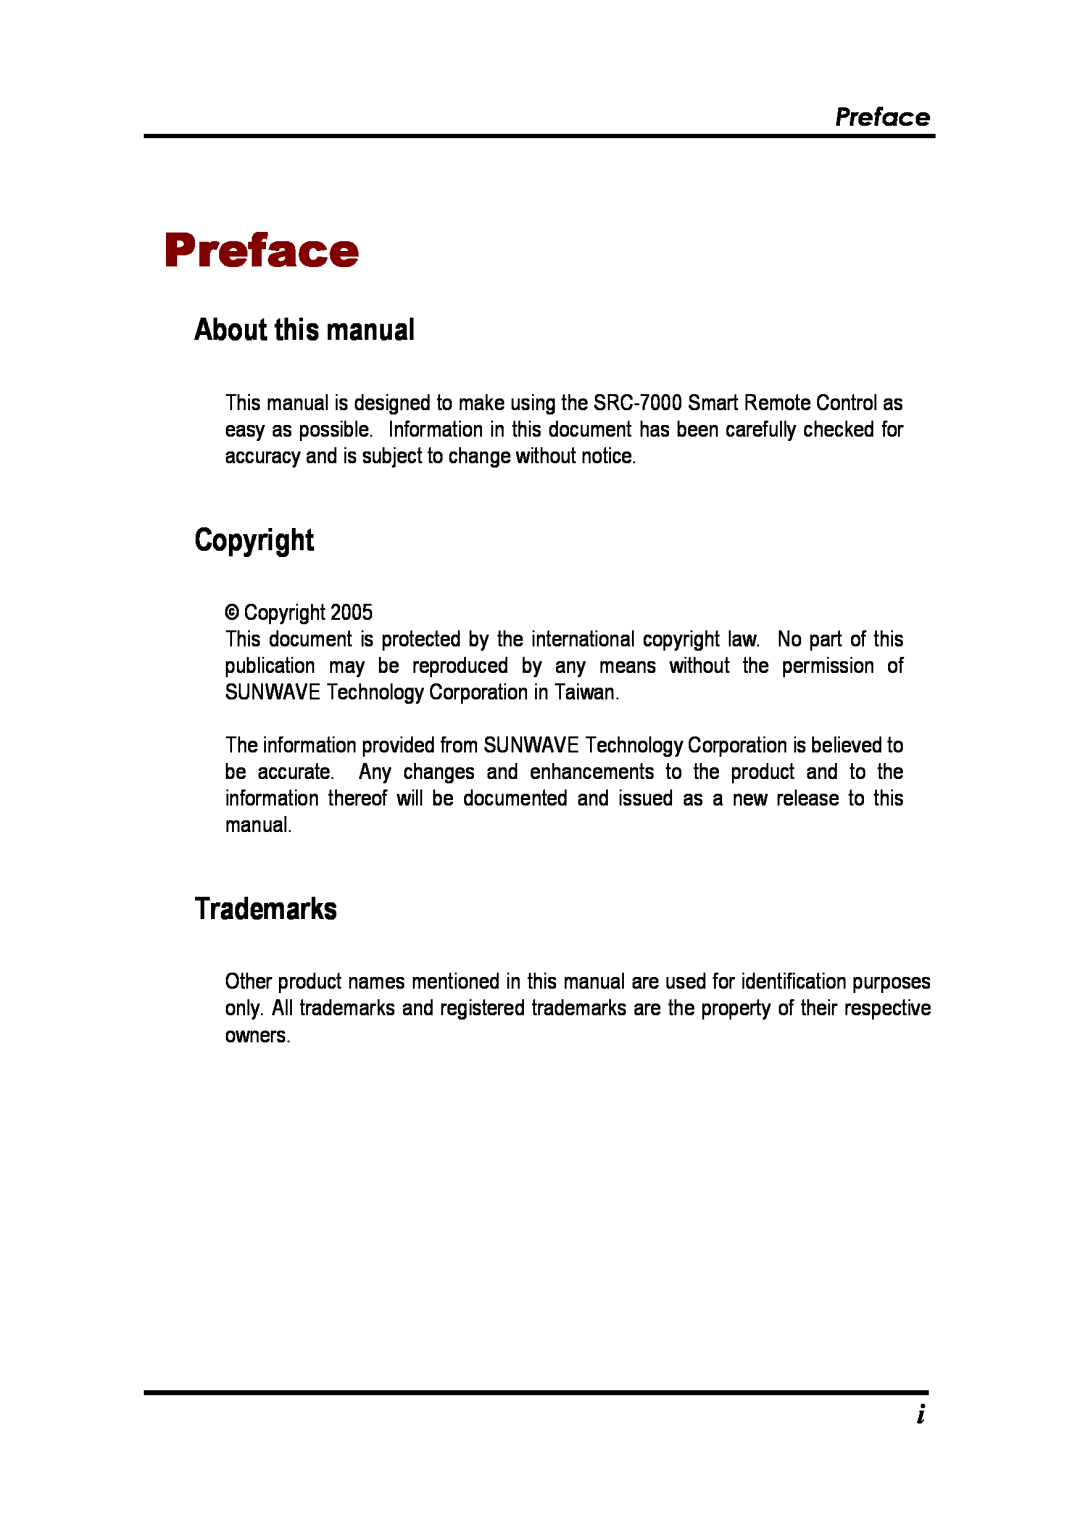 Sunwave Tech SRC-7000 Preface, About this manual, Copyright, Trademarks 